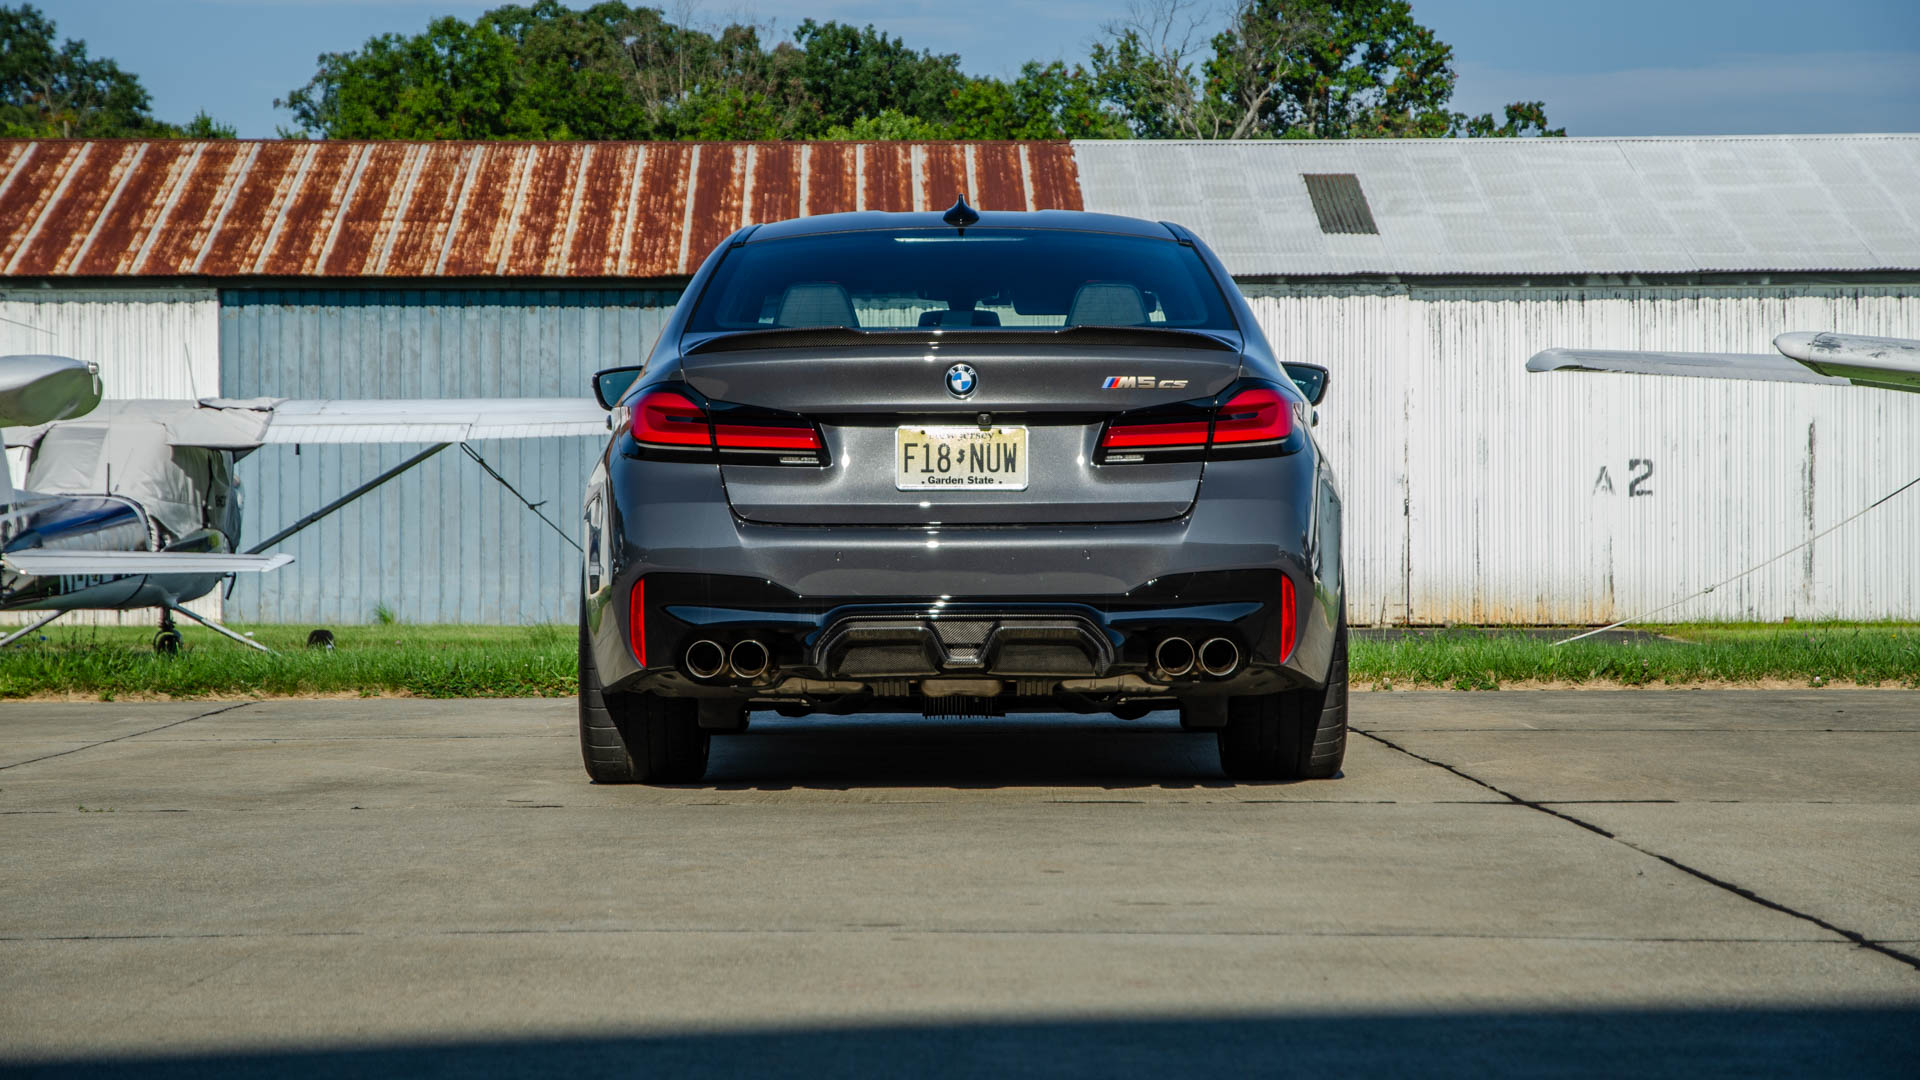 TEST DRIVE: BMW M5 CS — The M5 Goes Out with a Bang